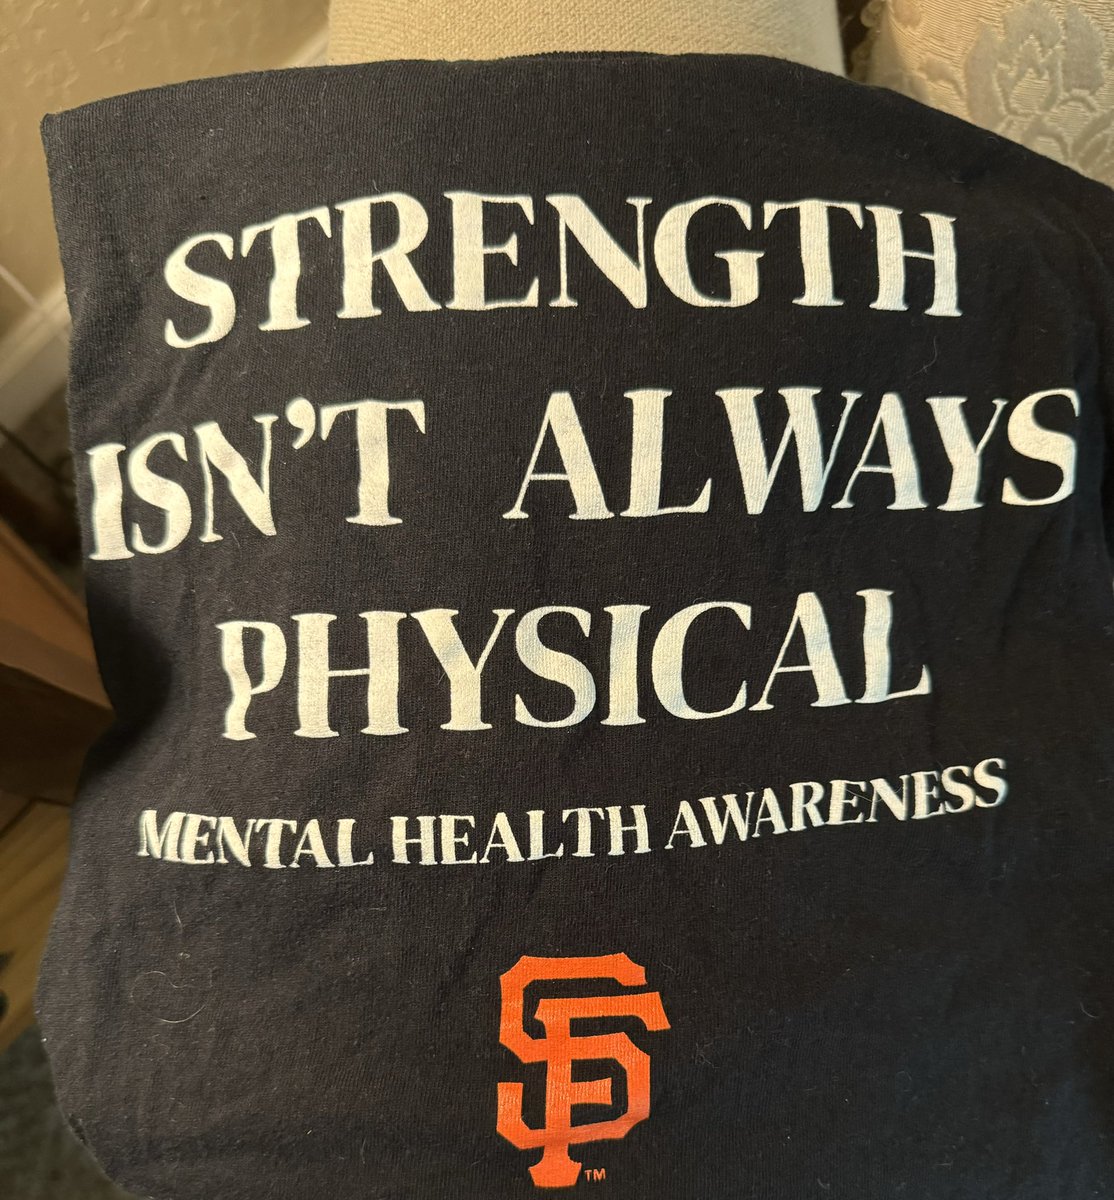 One of my fav t-shirts from the #SFGiants  #StopTheStigma
#MentalHealthAwarenessMonth